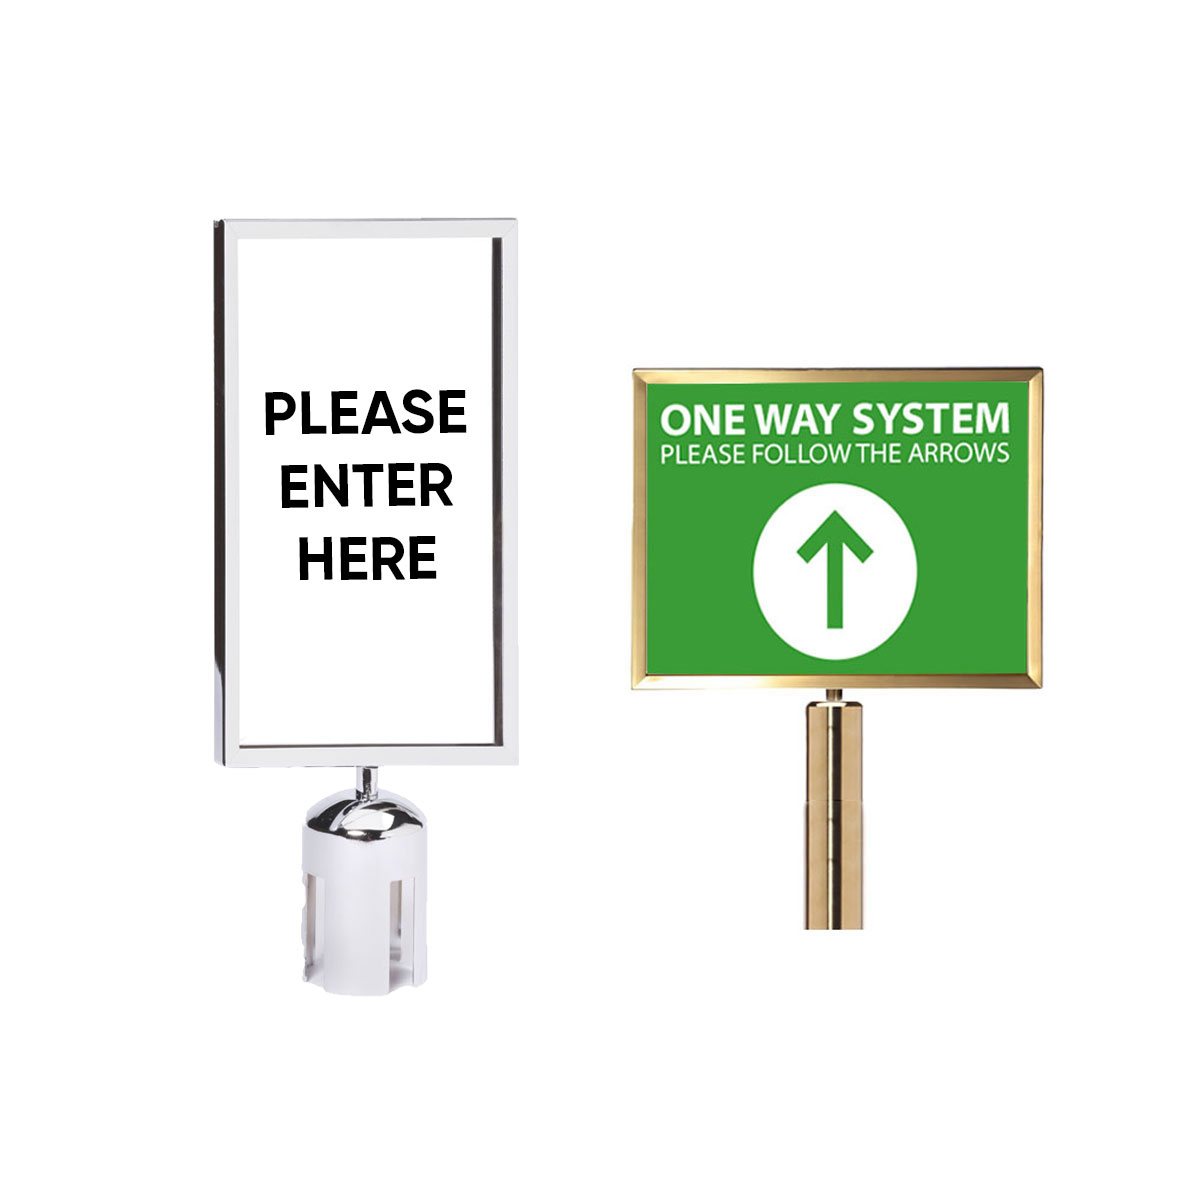 Queue Barrier Sign Holder. For Use With Post & Rope Queue Barriers. Work With All Major Brands. A3 or A4 Size Complete With Post Adaptor For Quick & Easy Fit. 